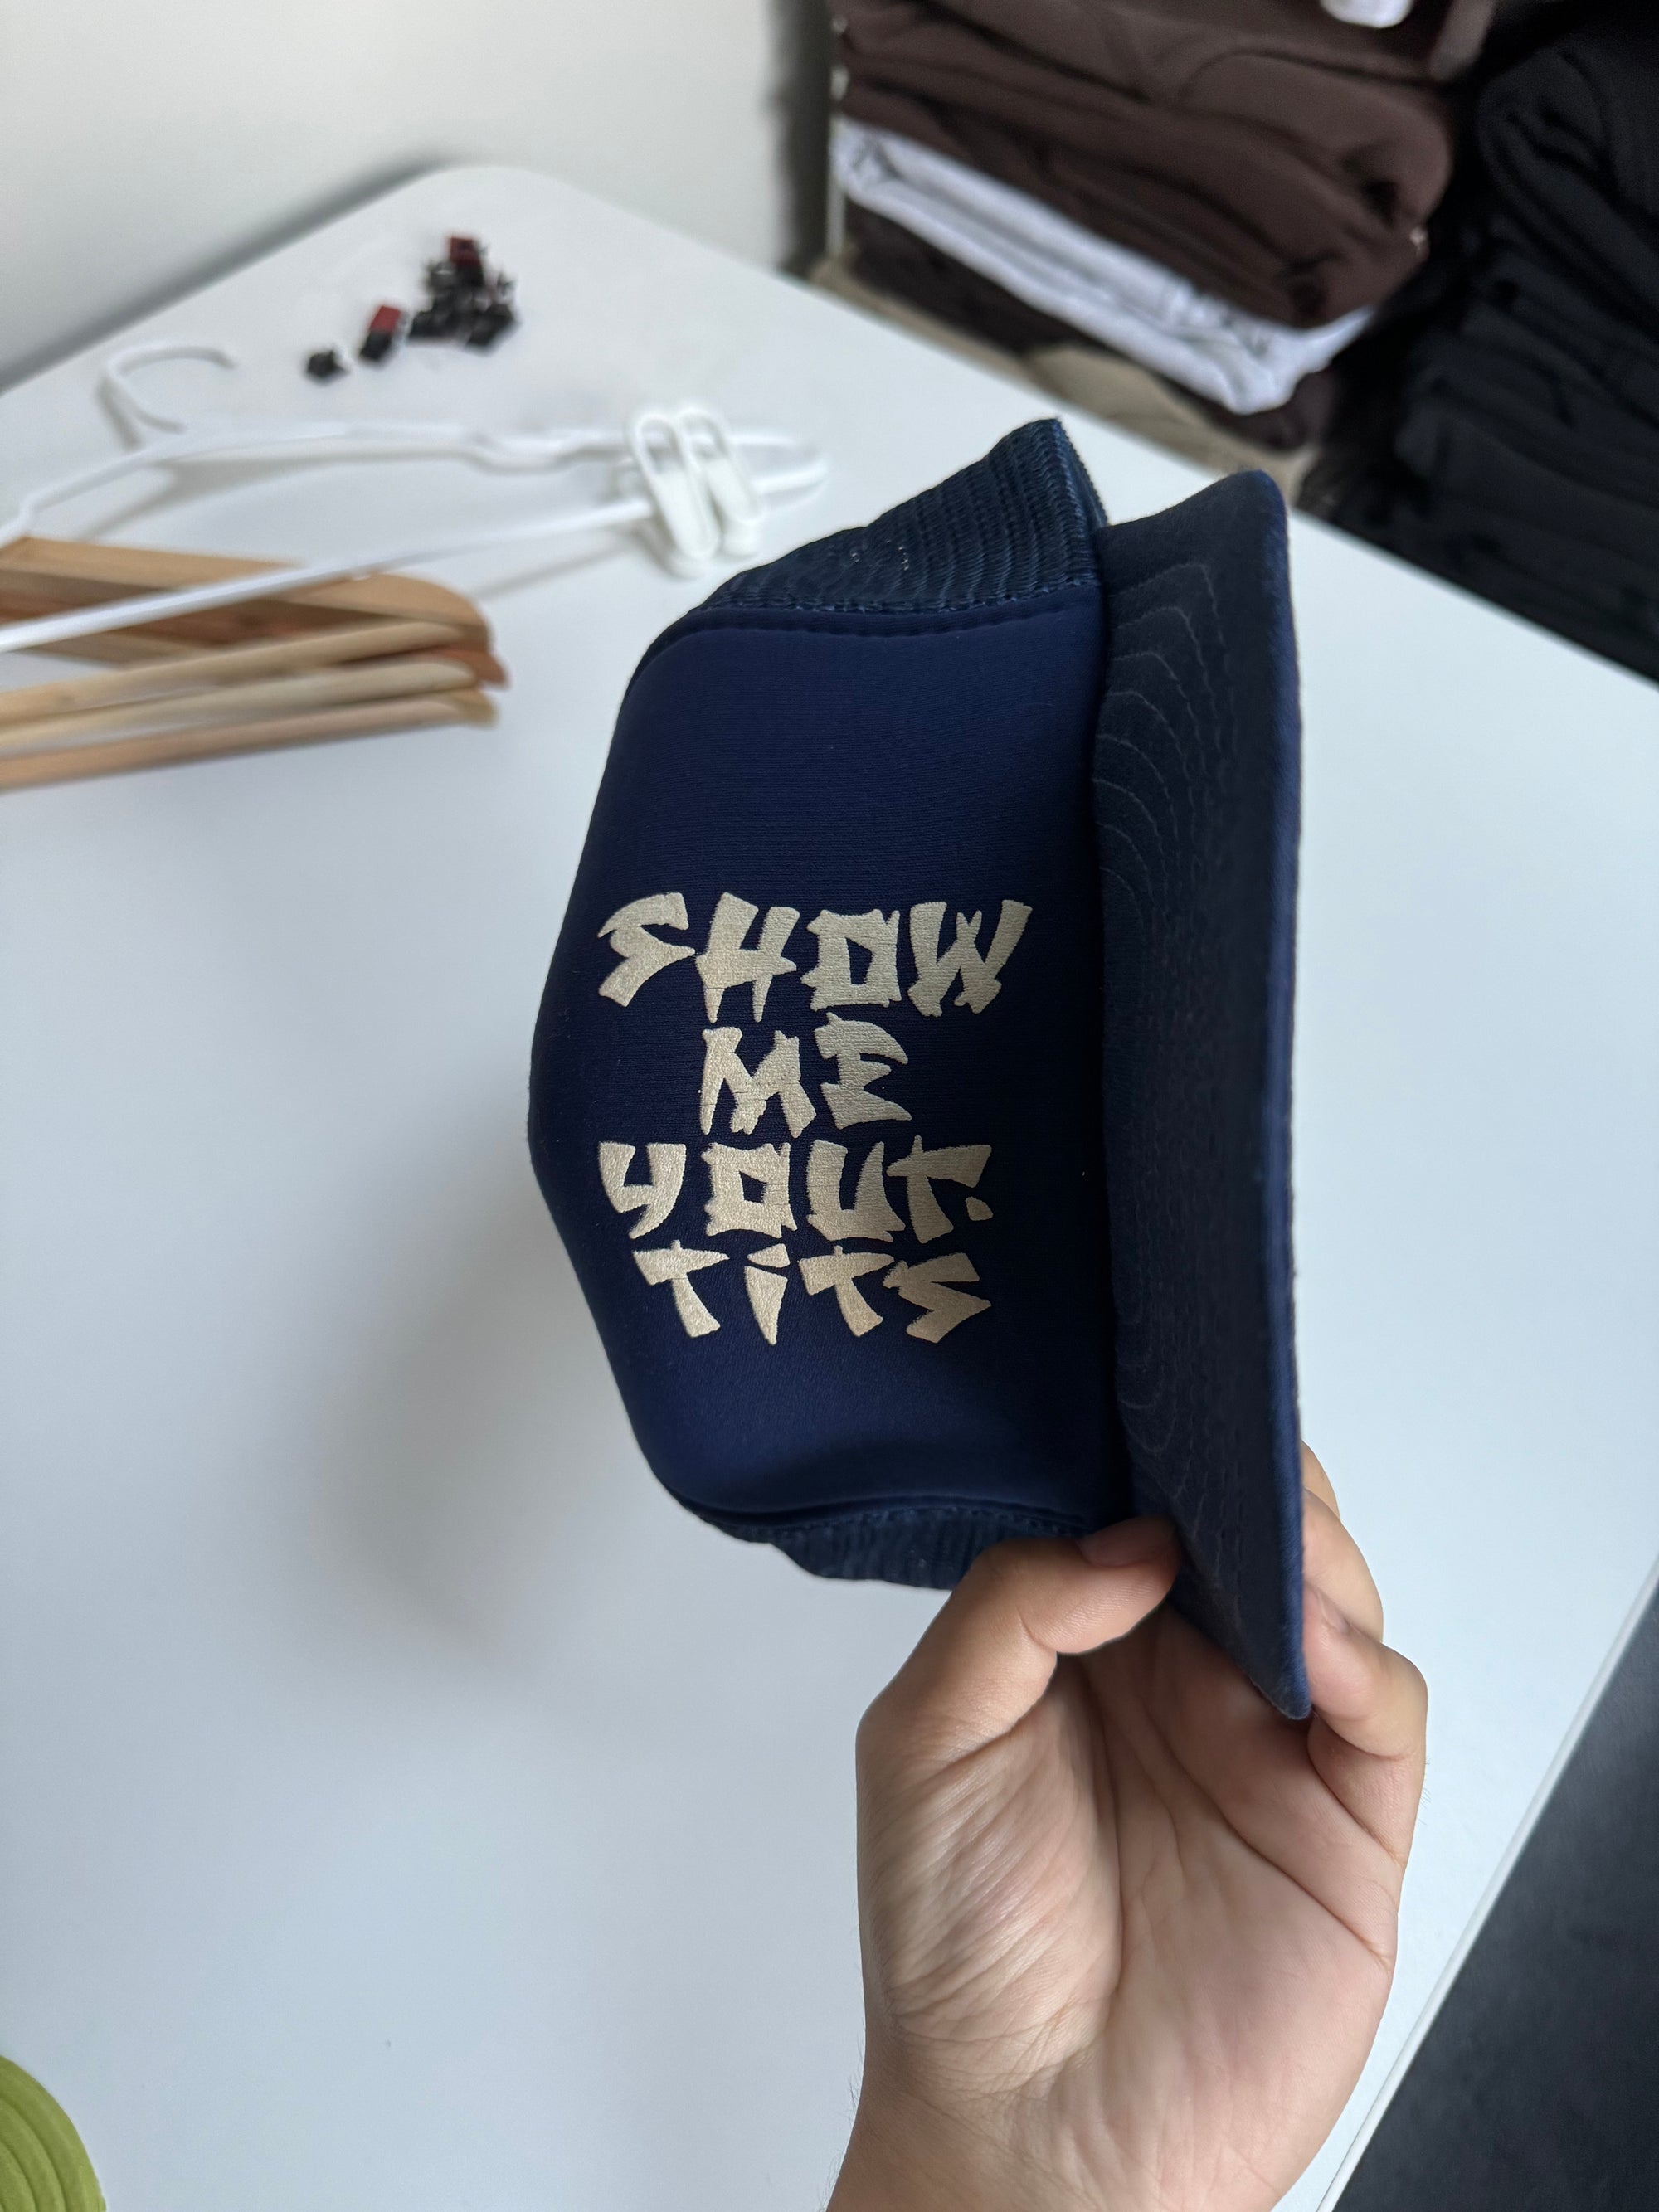 1980s “Show Me Your Tits” Trucker Hat